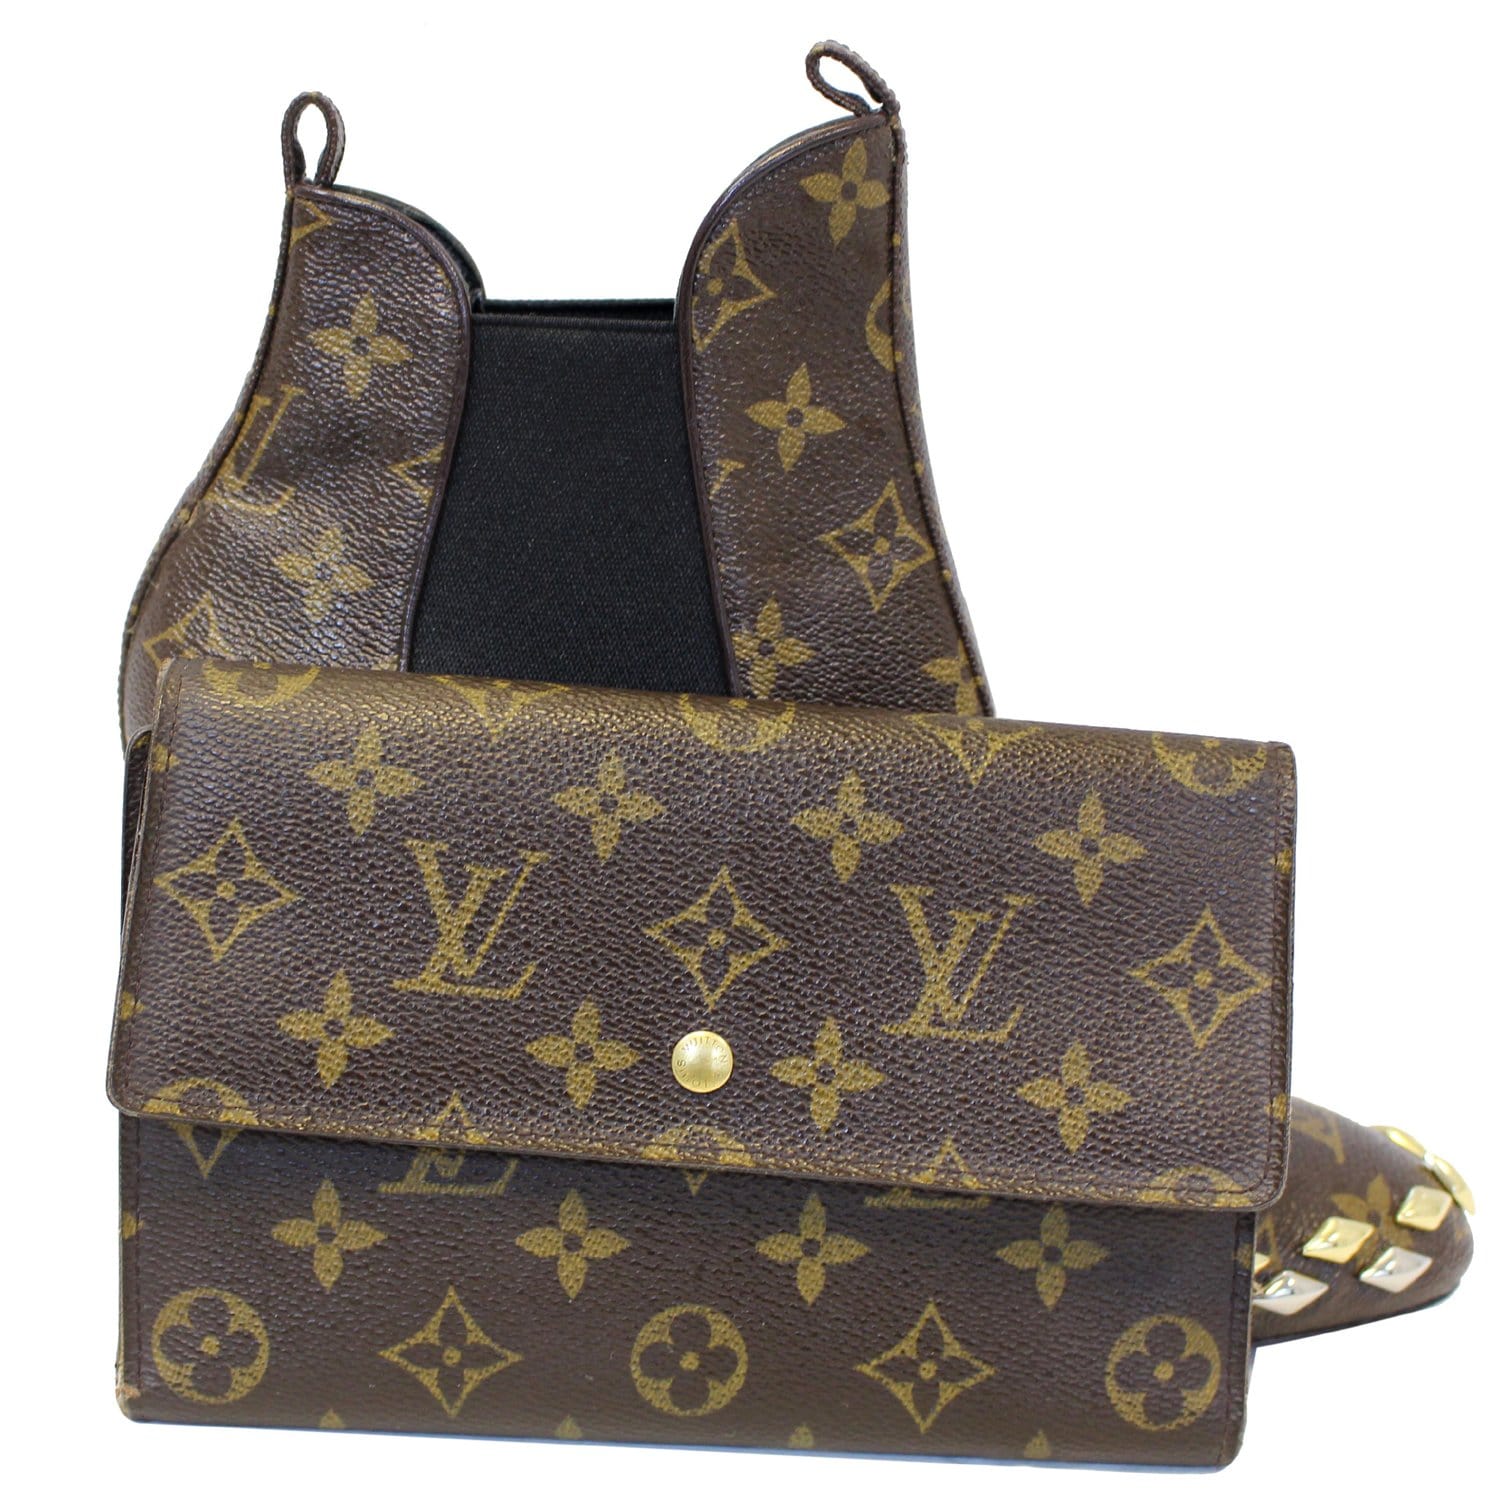 The Louis Vuitton Zoe 🖤 It also comes in reverse and canvas with fuch, louisvuitton wallet